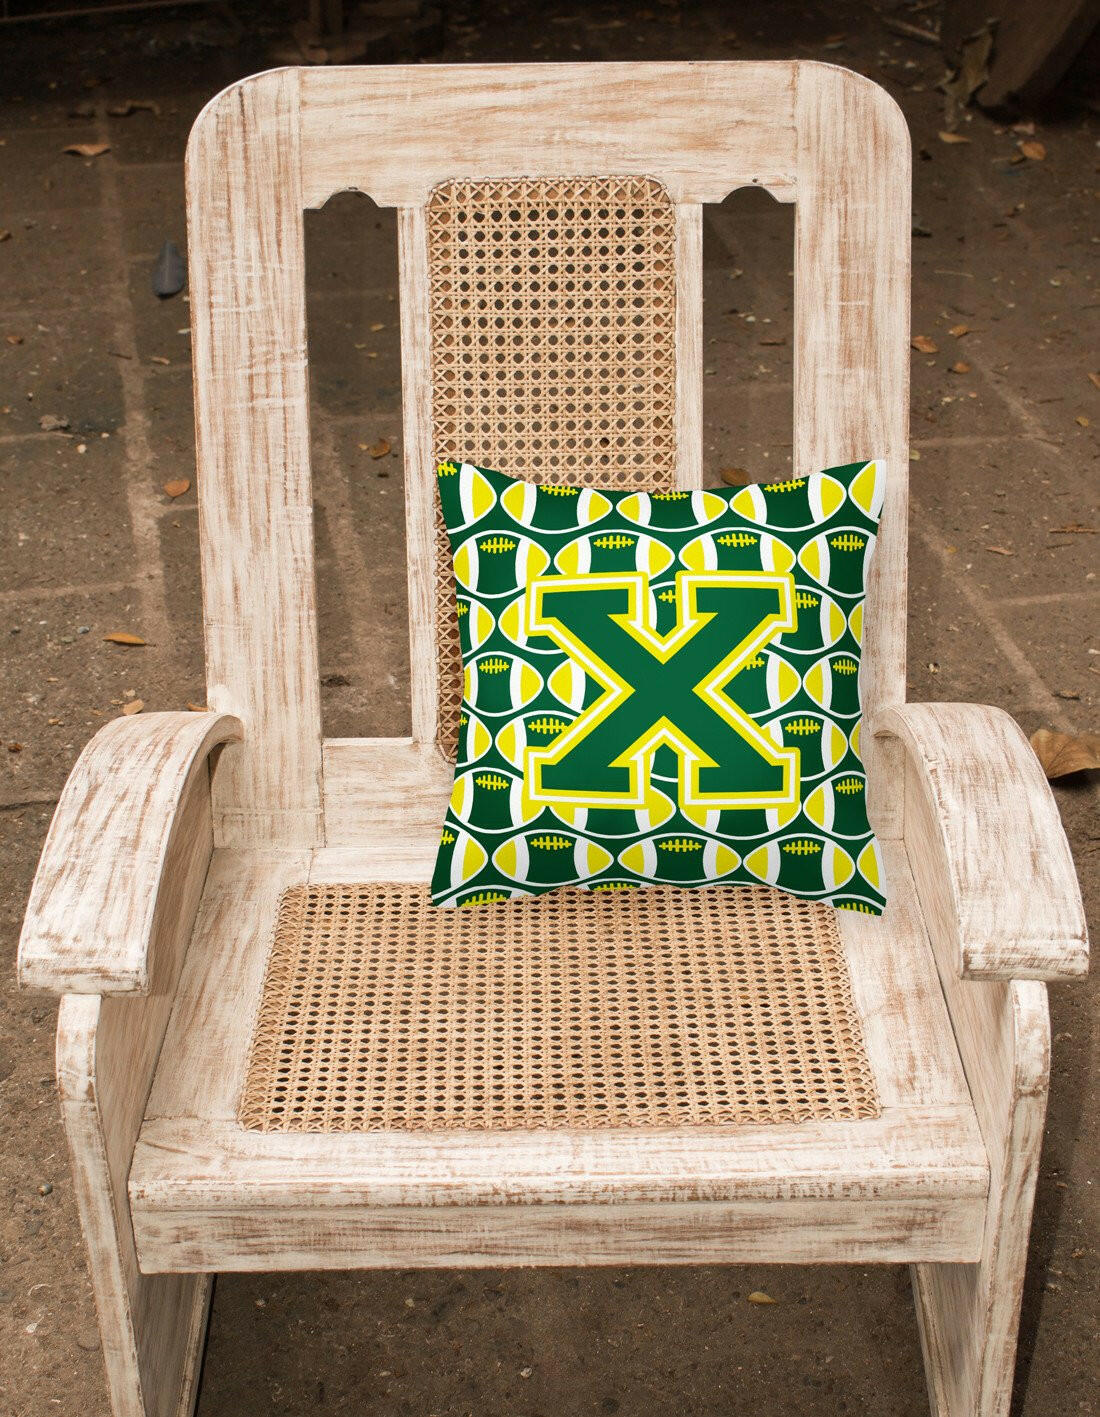 Letter X Football Green and Yellow Fabric Decorative Pillow CJ1075-XPW1414 by Caroline's Treasures